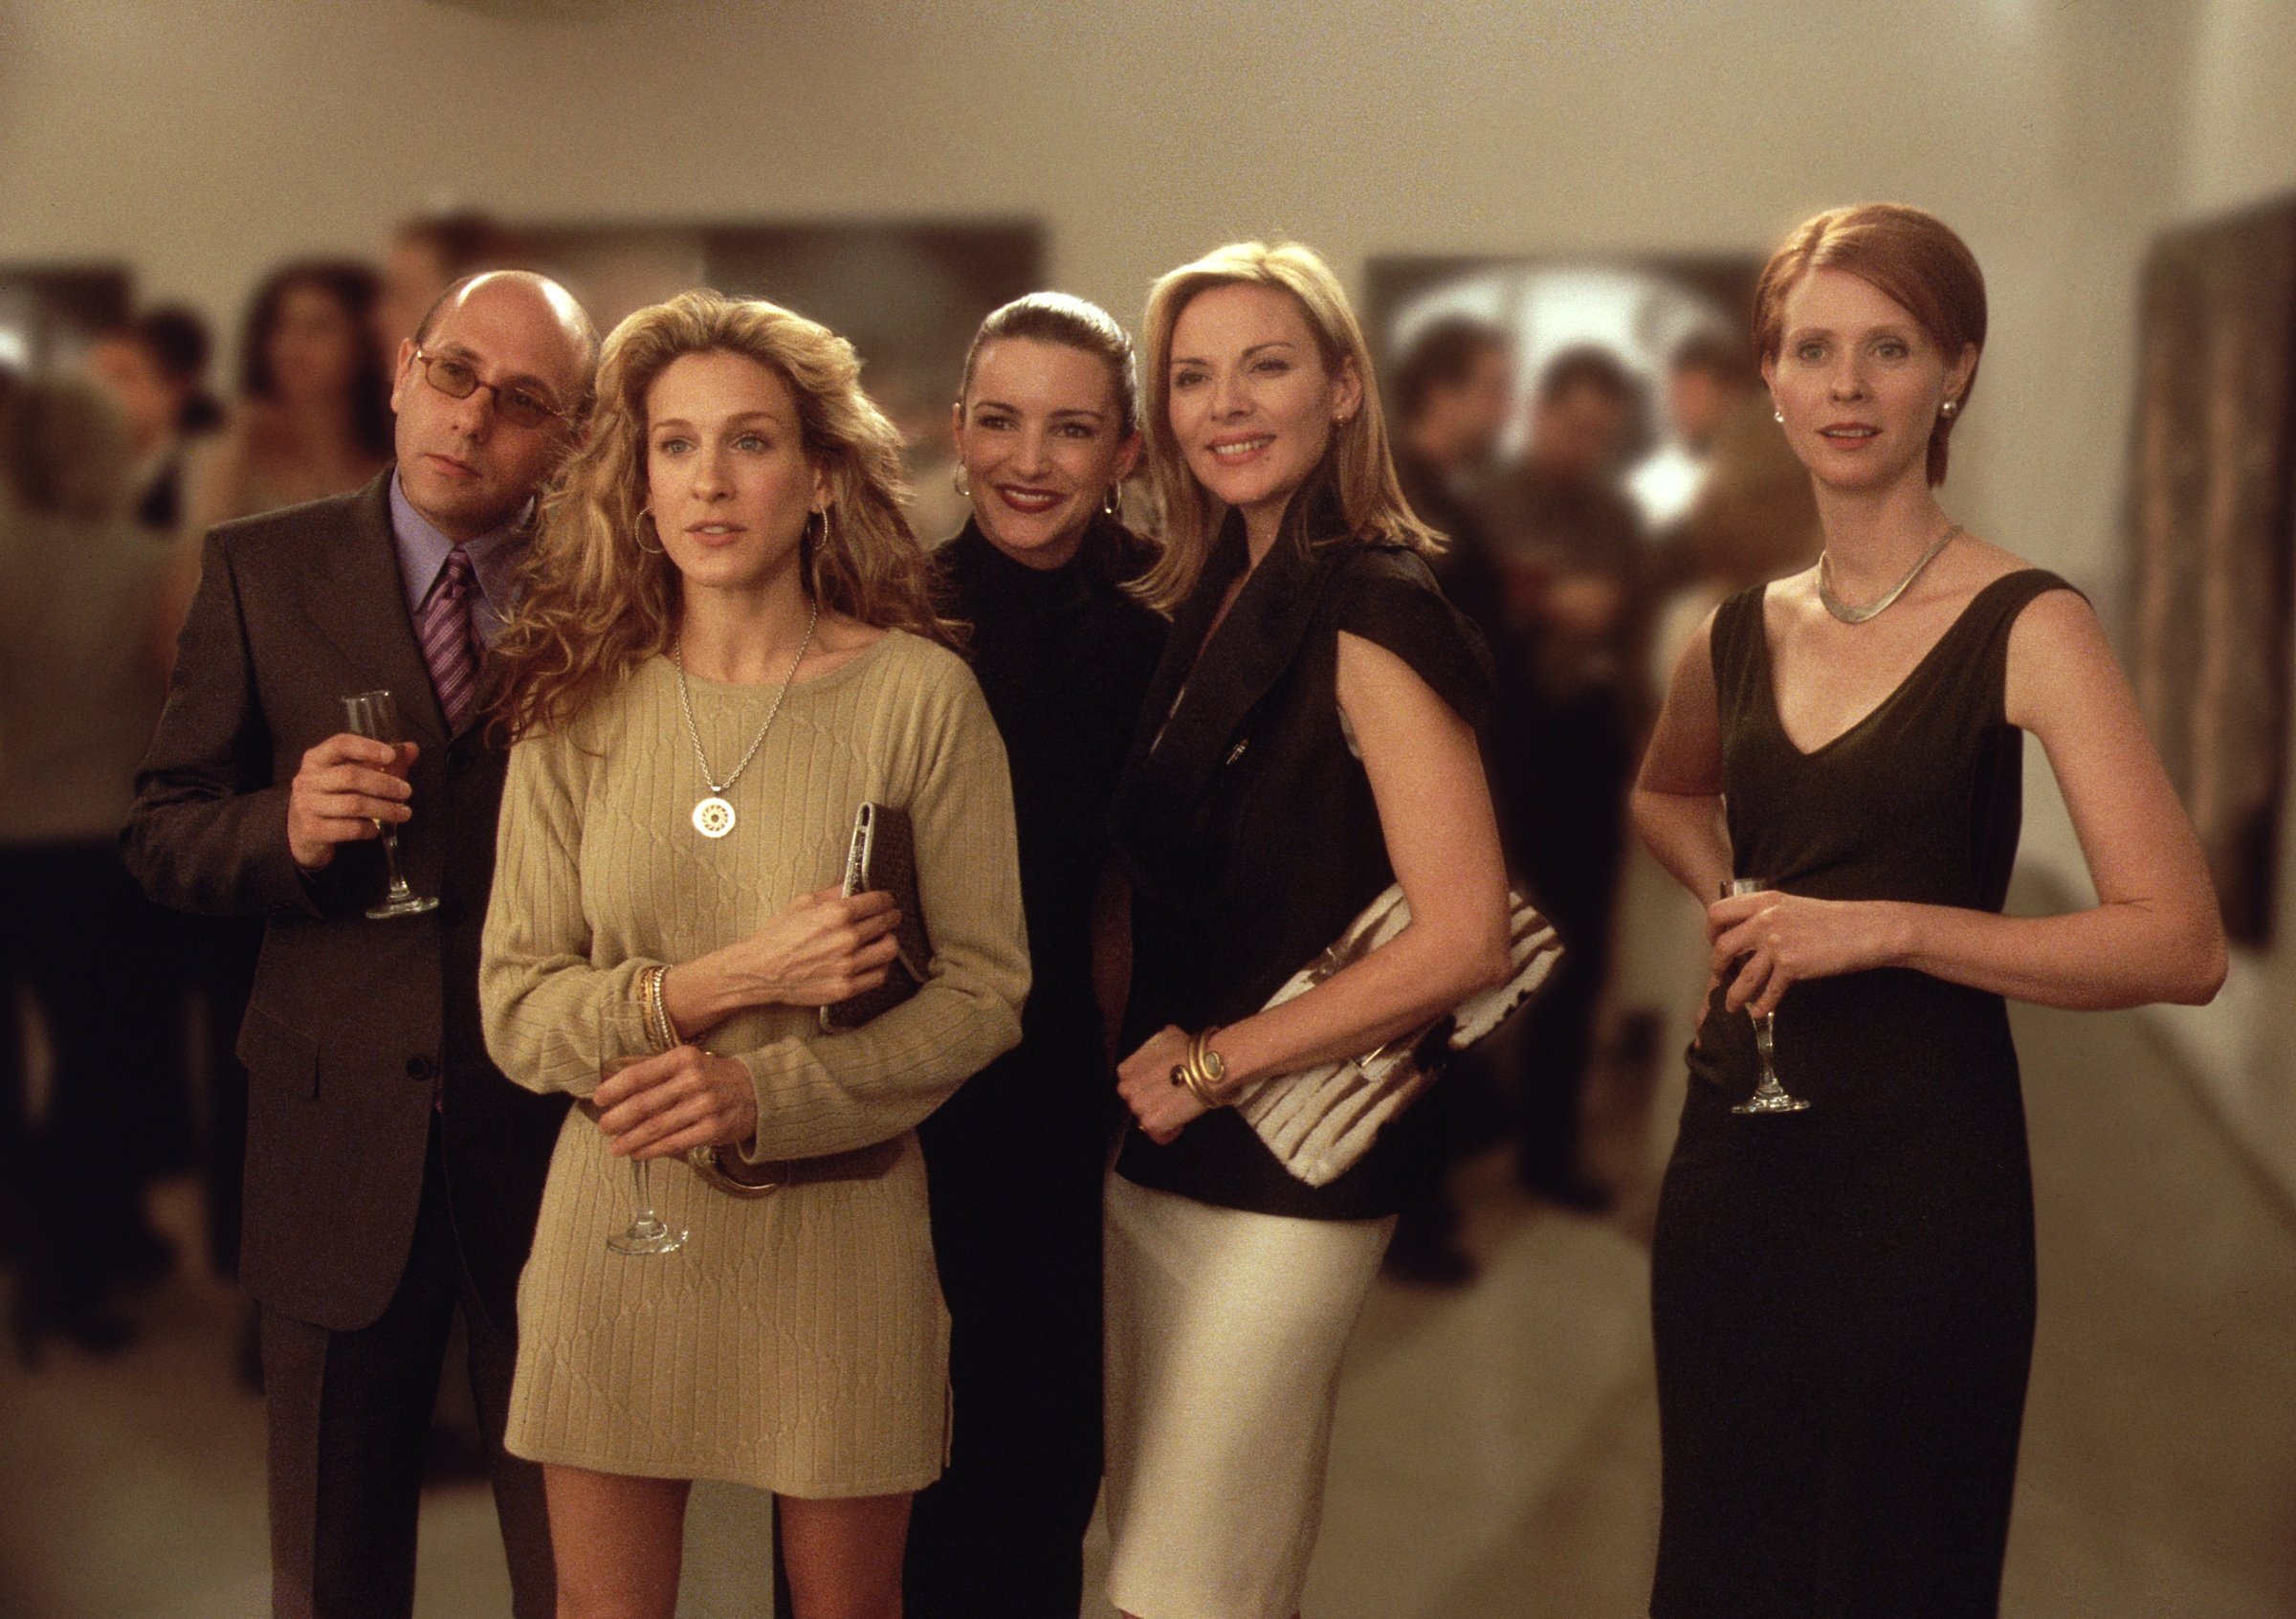 Willie Garson, Sarah Jessica Parker, Kristin Davis, Kim Cattrall, and Cynthia Nixon pictured during the third season of "Sex and the City," | Photo: Getty Images